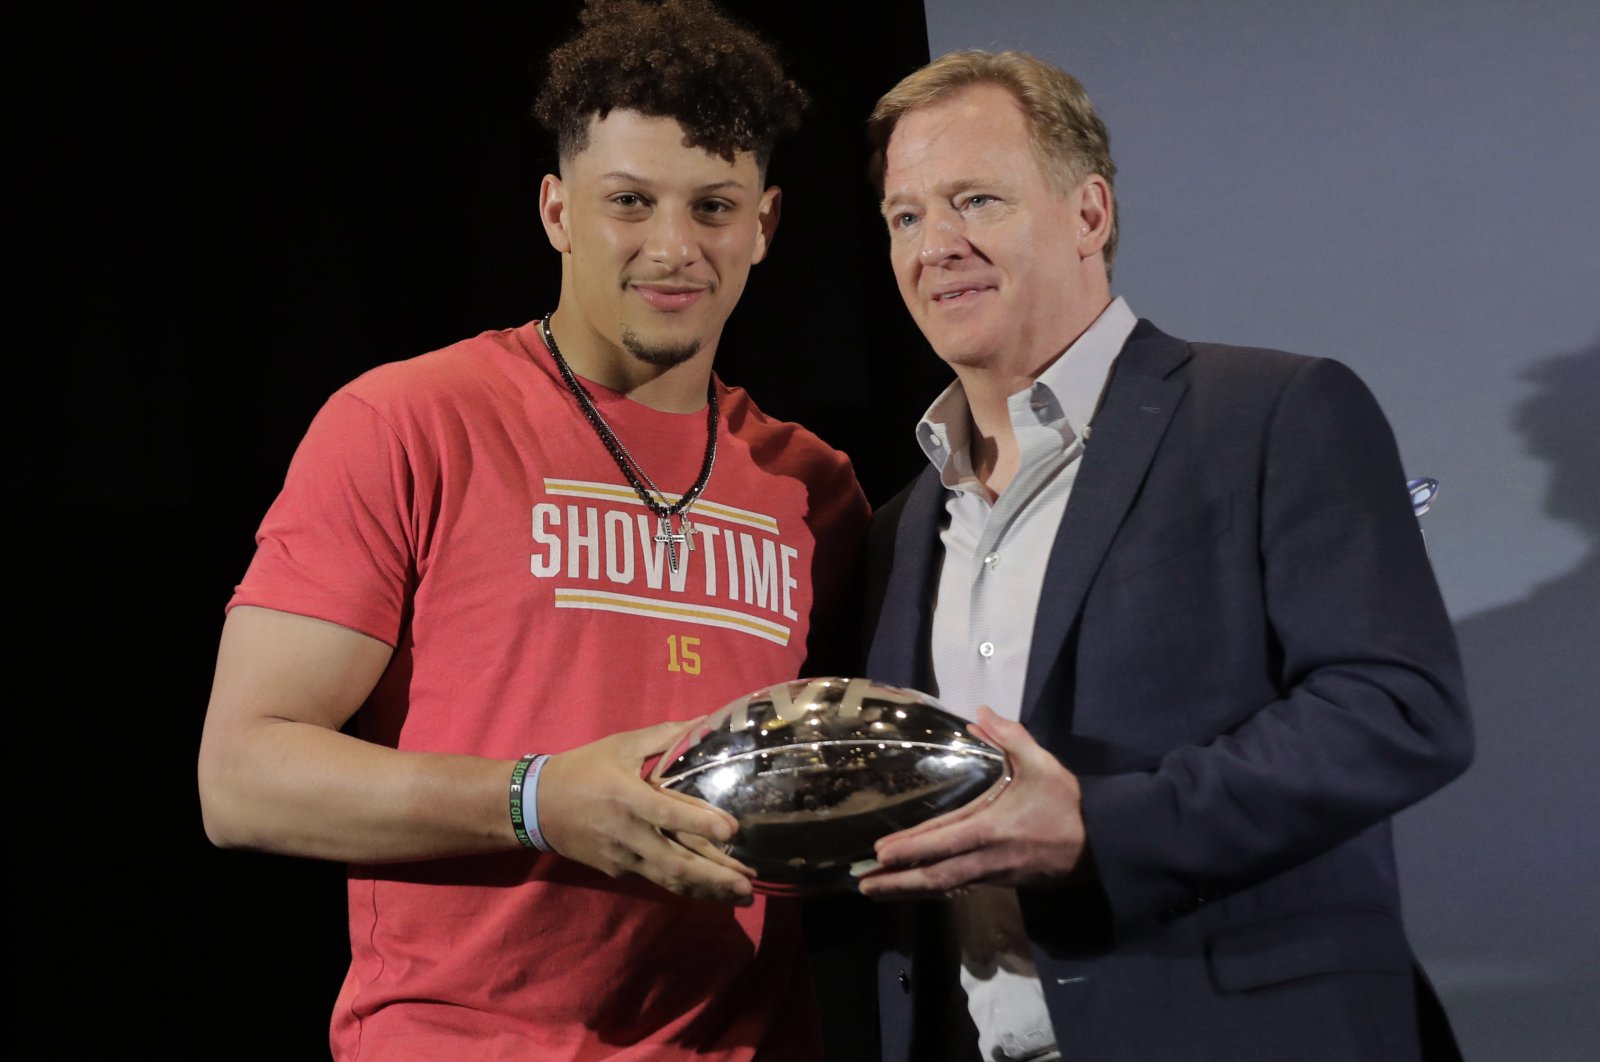 Patrick Mahomes (L) holds the MVP trophy with NFL Commissioner Roger Goodell before a news conference in Miami, Florida, U.S., Feb. 3, 2020. (AP Photo)